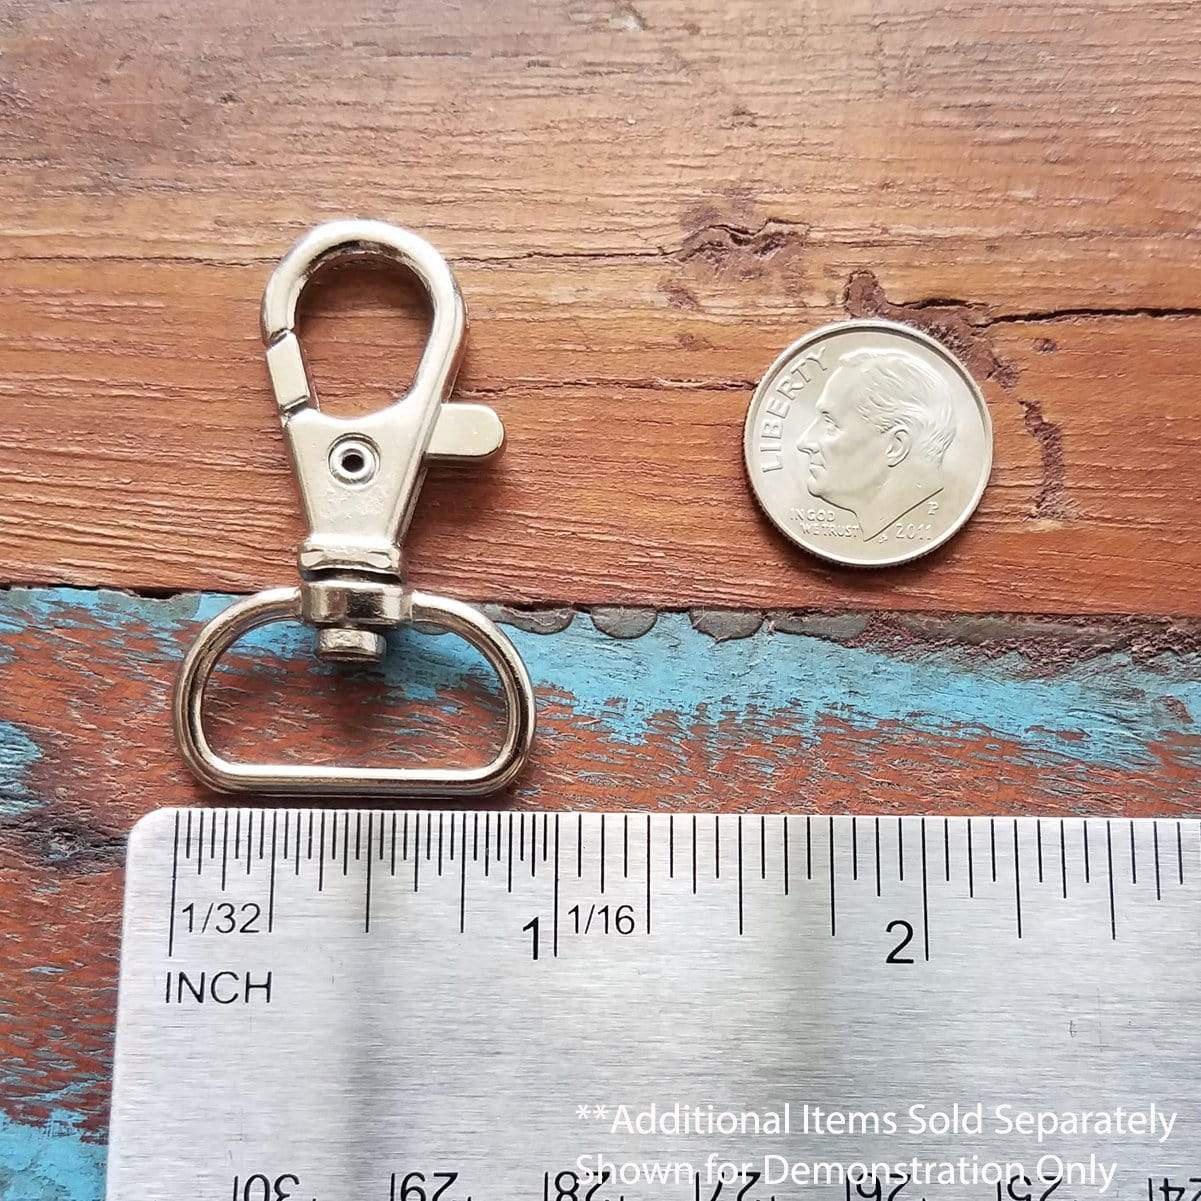 Premium Metal Lobster Claw Clasps with Wide ¾ Inch D Ring and 360 Swivel Snap Clasp Trigger ID / Key Clip (6920-2360) 6920-2360